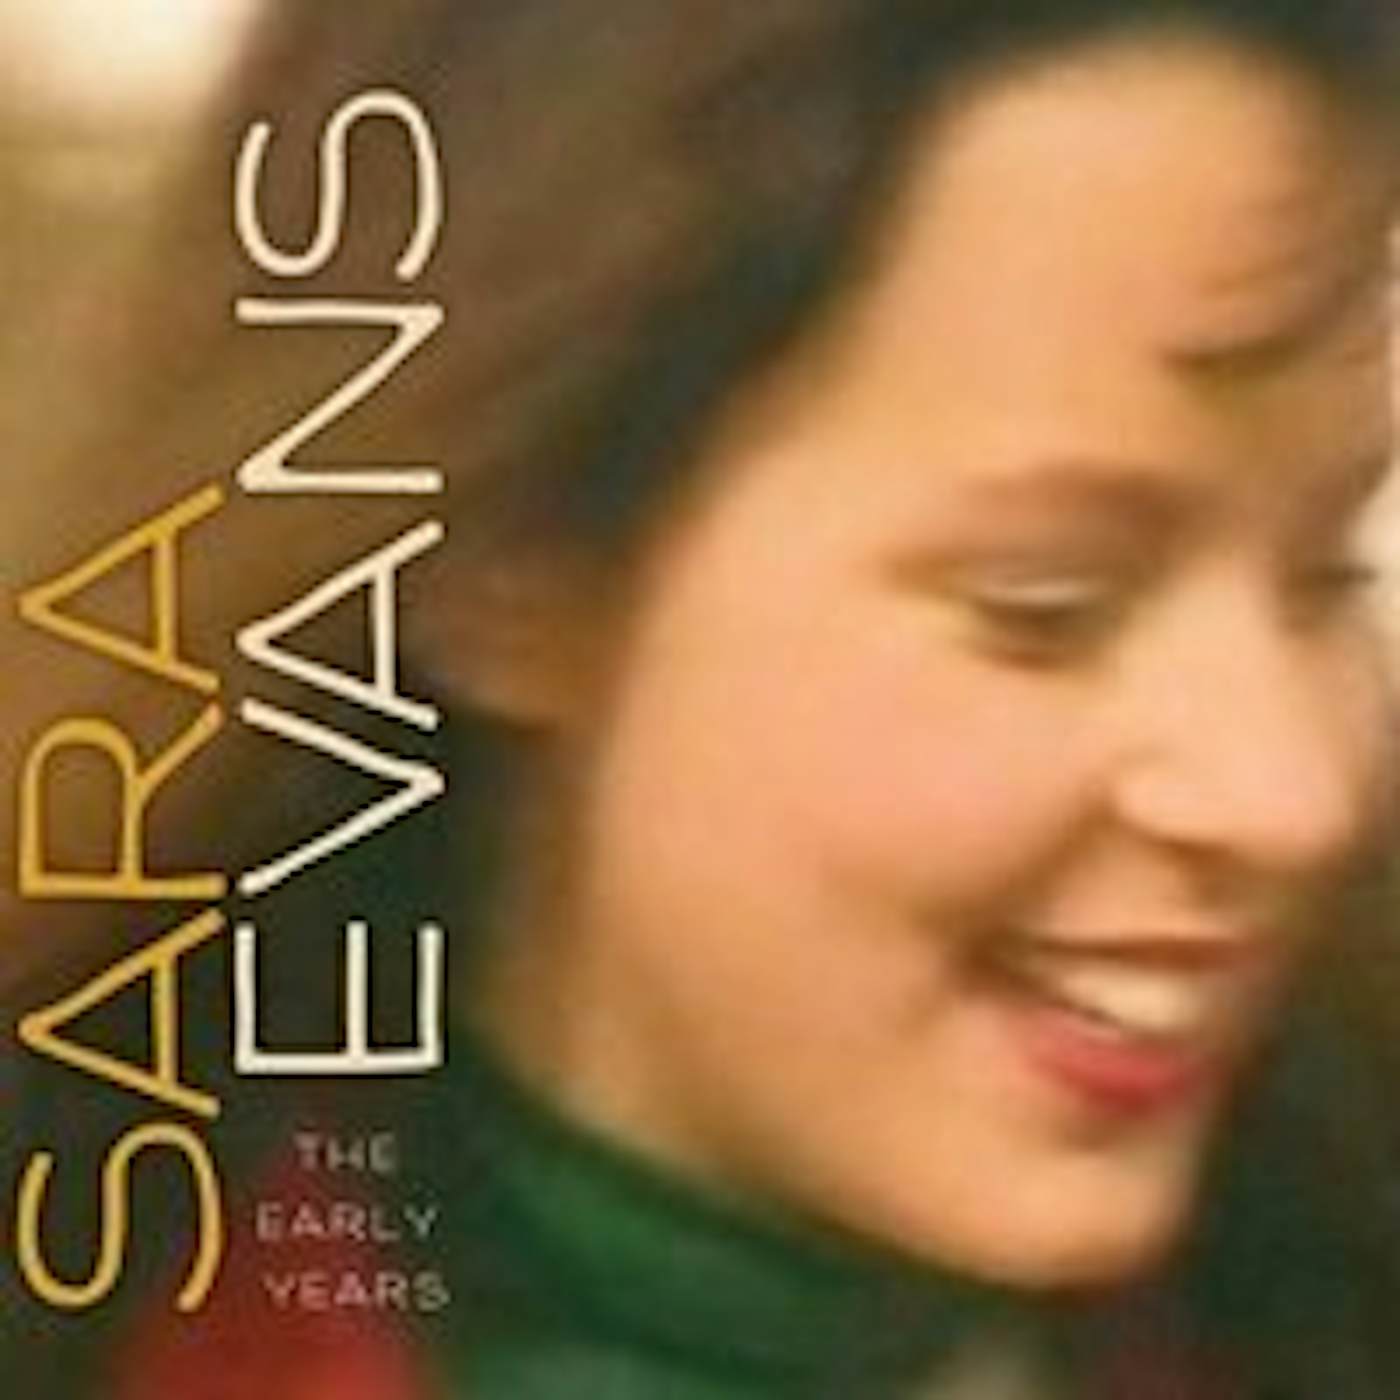 SARA EVANS (THE EARLY YEARS) CD